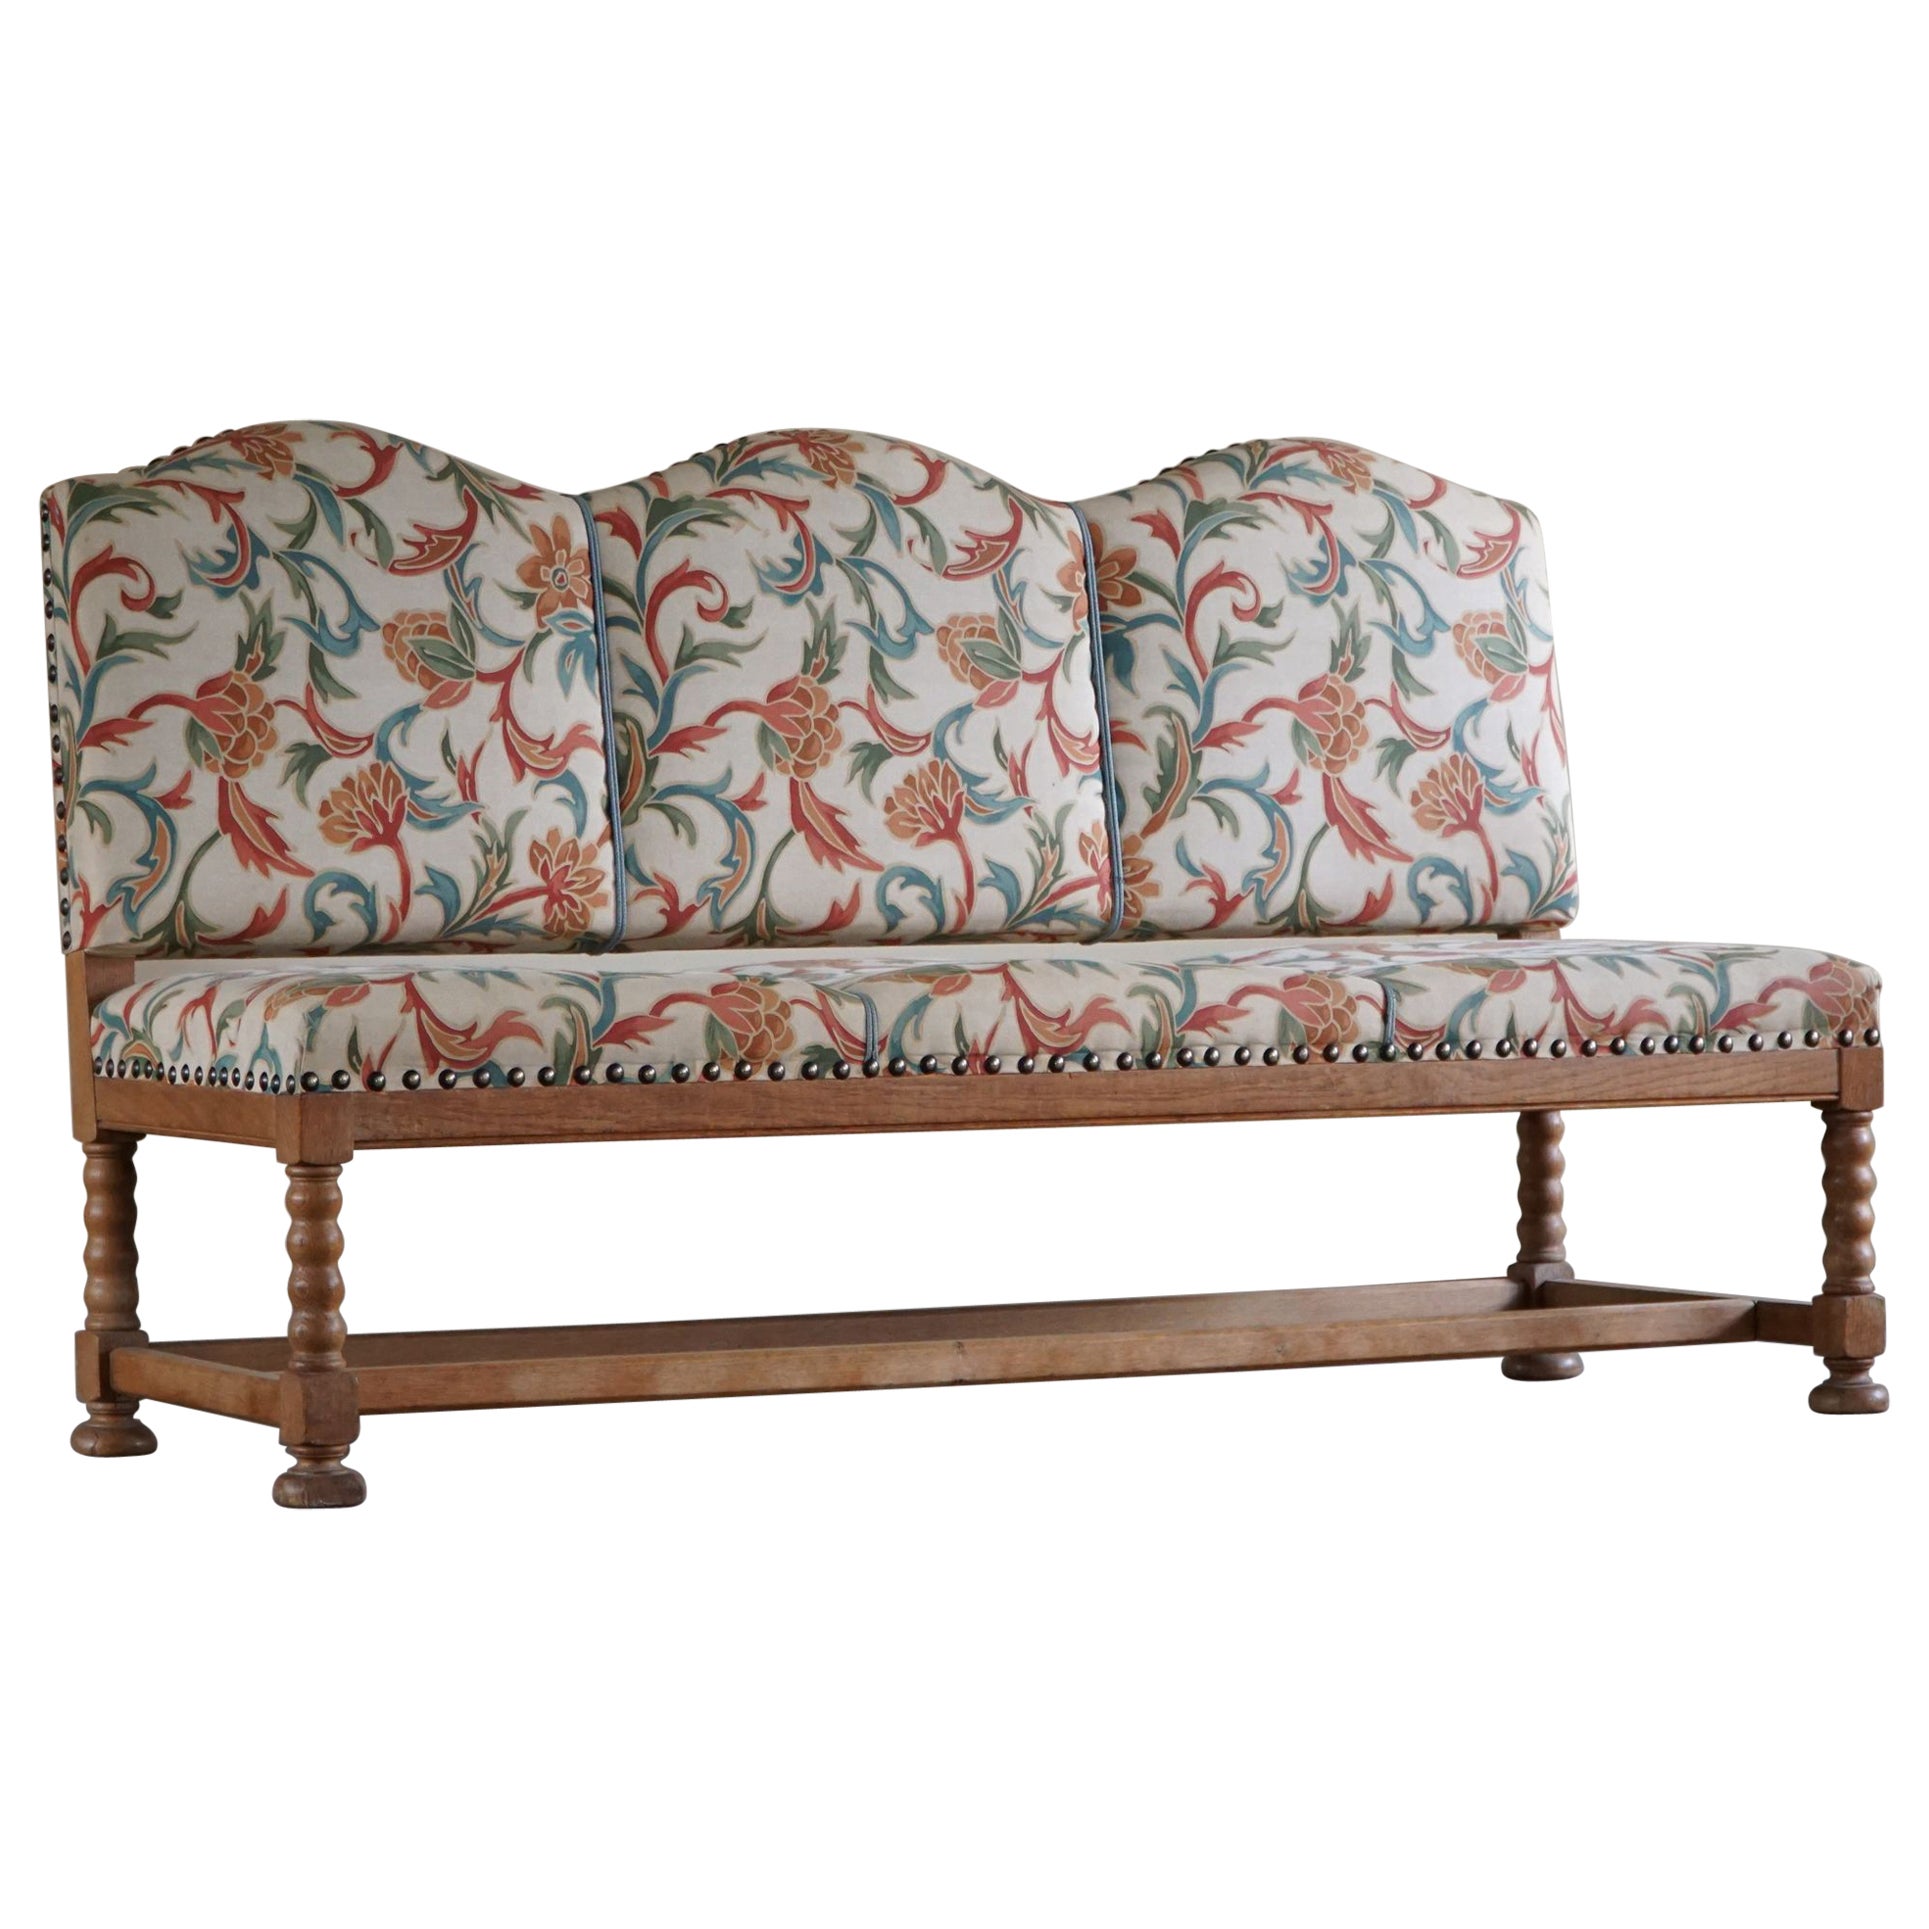 19th Century Sculptural Three Seater Baroque Sofa, Made by a Danish Cabinetmaker